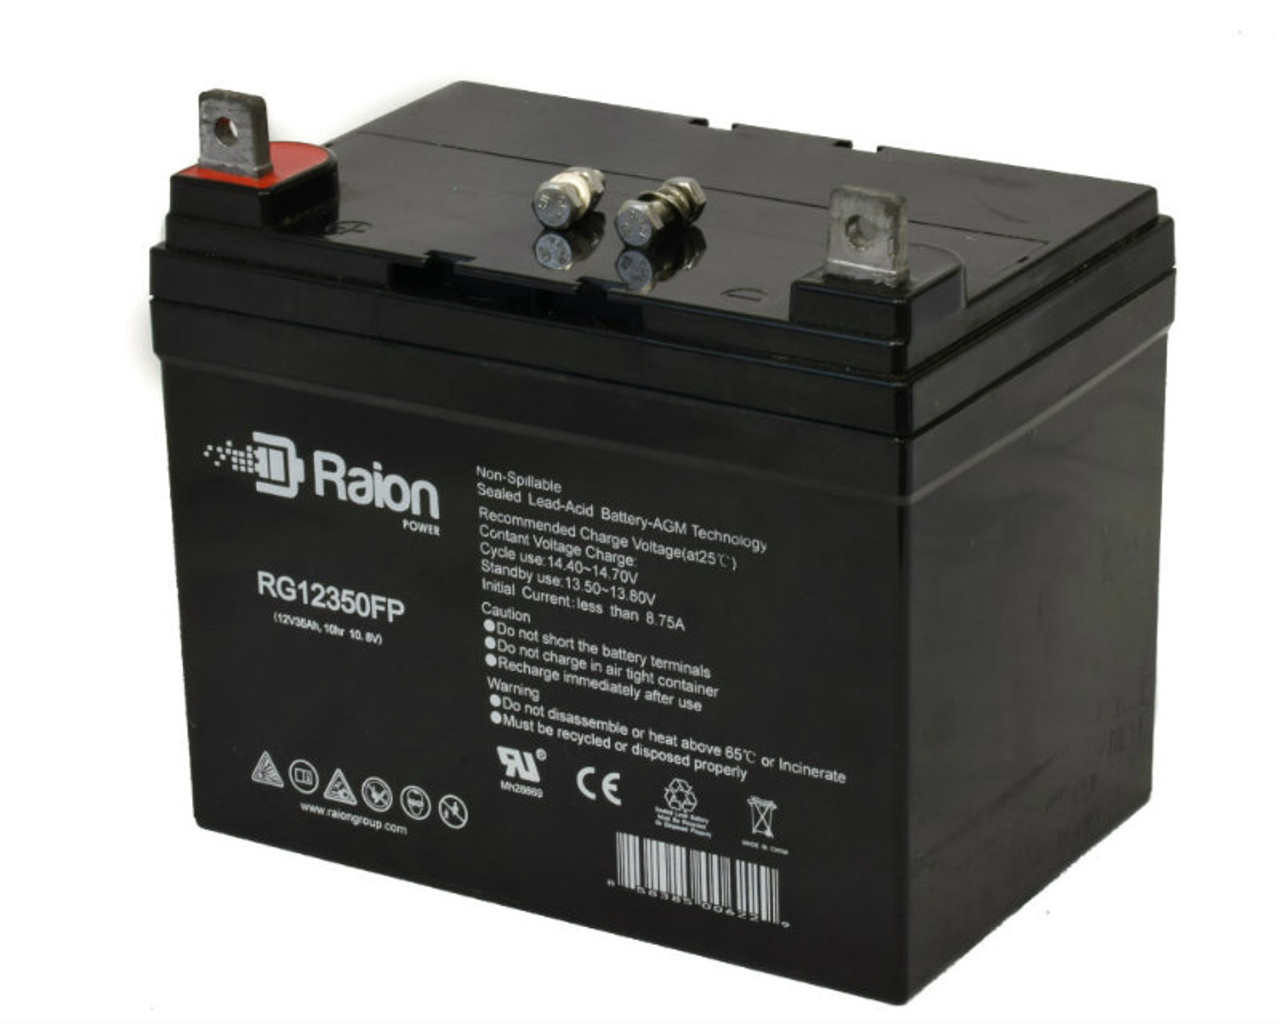 Raion Power Replacement 12V 35Ah RG12350FP Mobility Scooter Battery for Damaco Elite